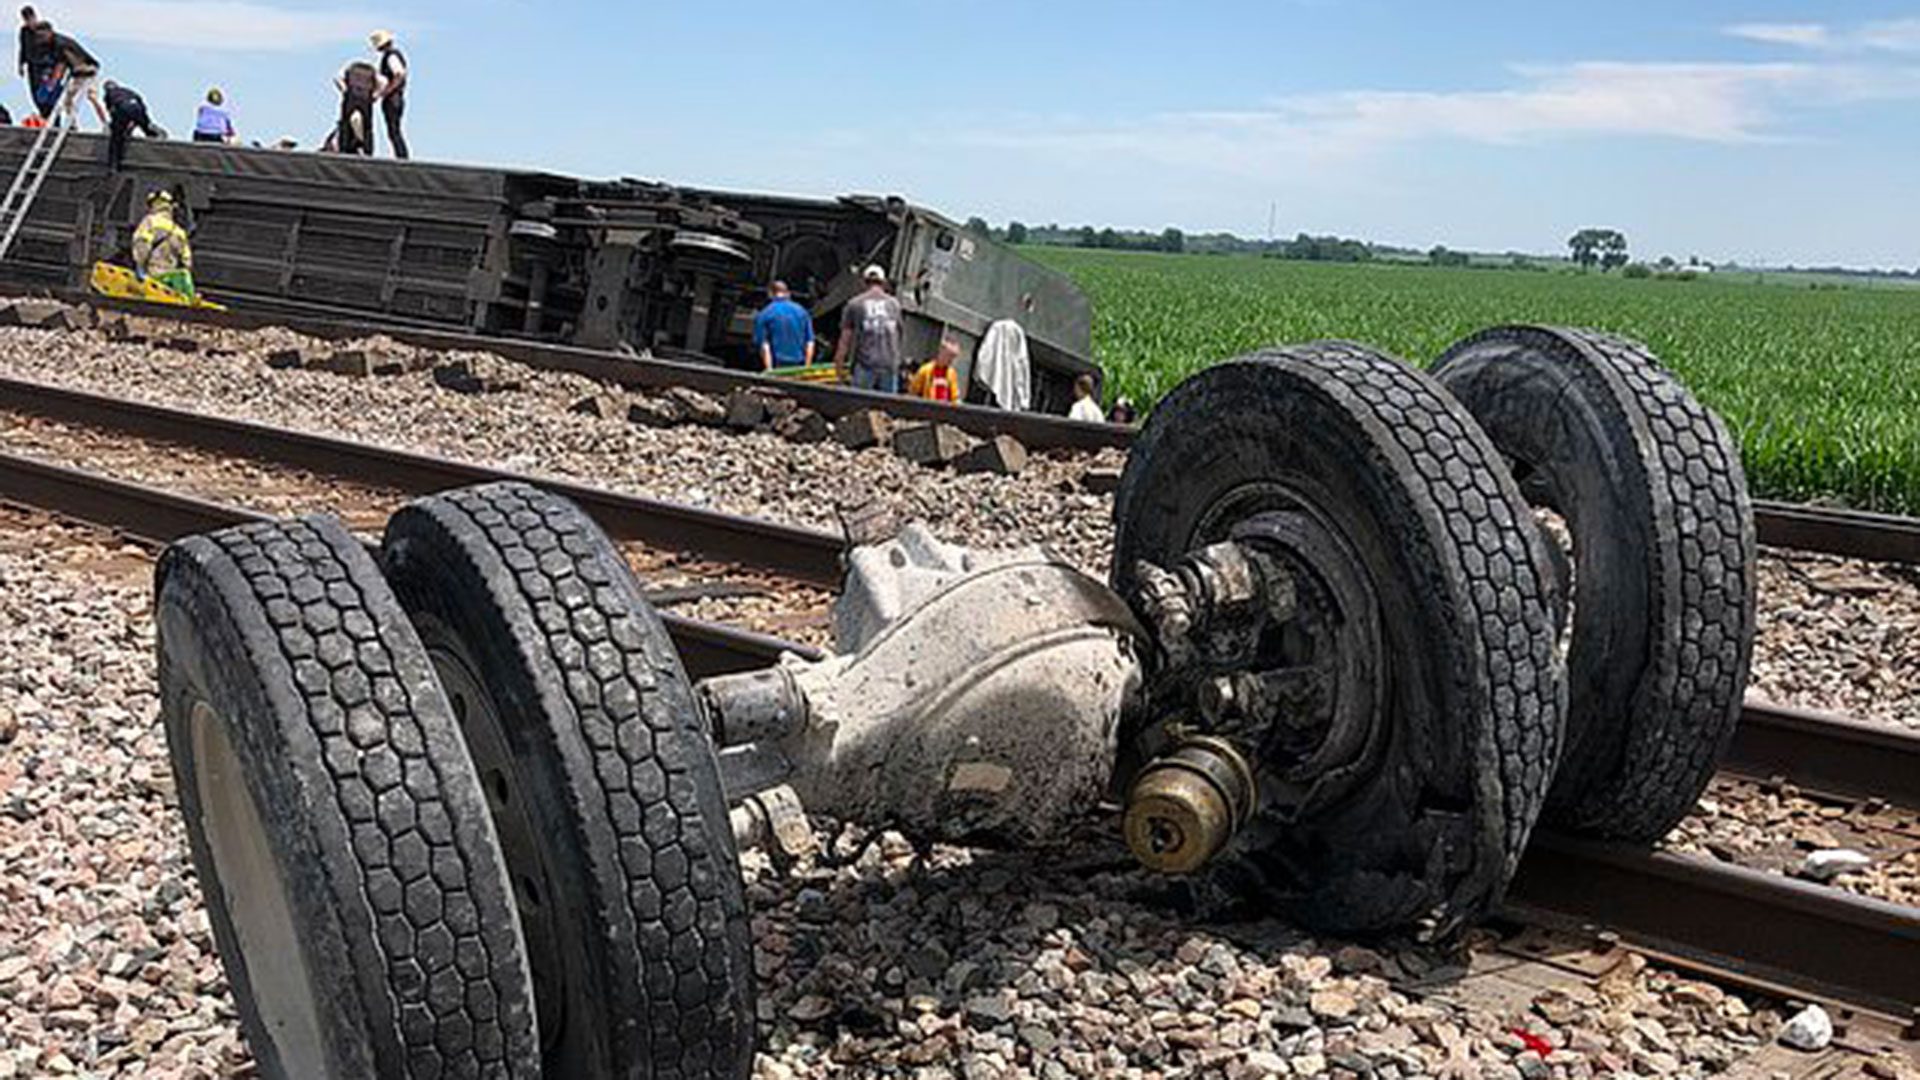 The train derailed after colliding with a dump truck